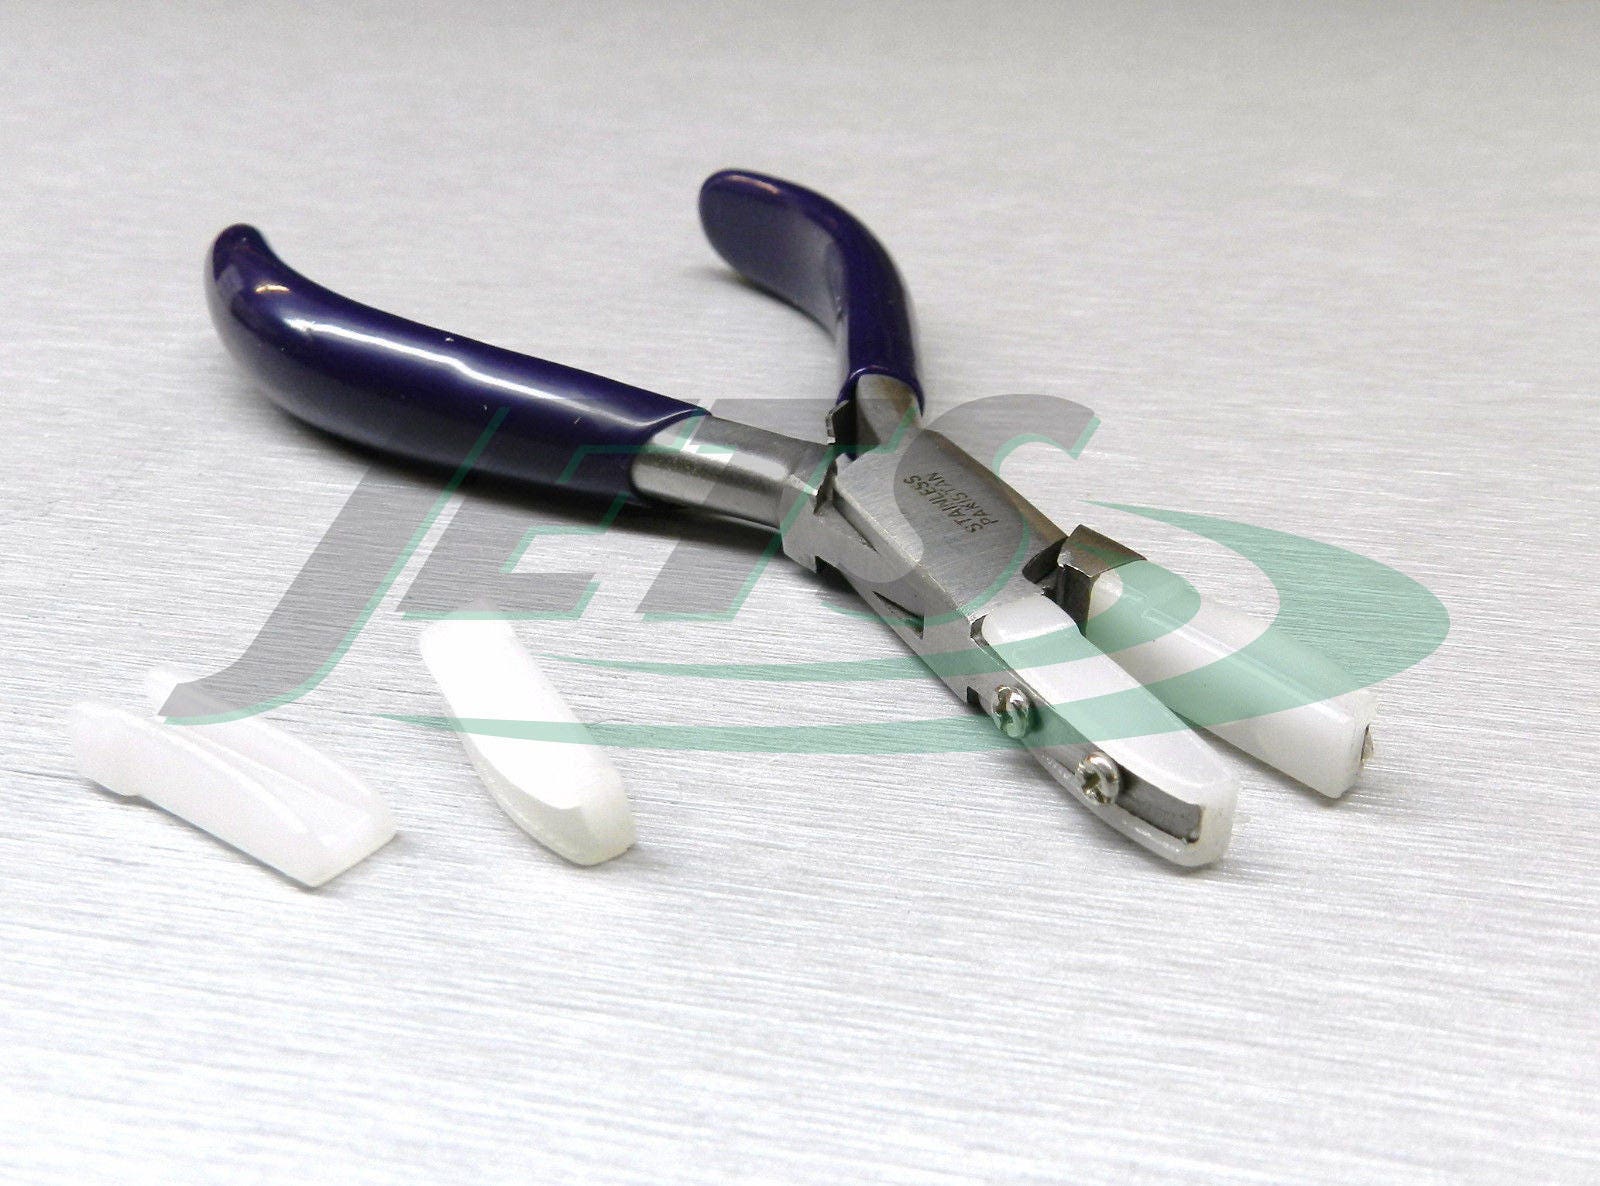  Flat Nose Pliers 5 Inch Smooth Jaw Pliers for Jewelry Making,  Wire Wrapping Bending : Arts, Crafts & Sewing